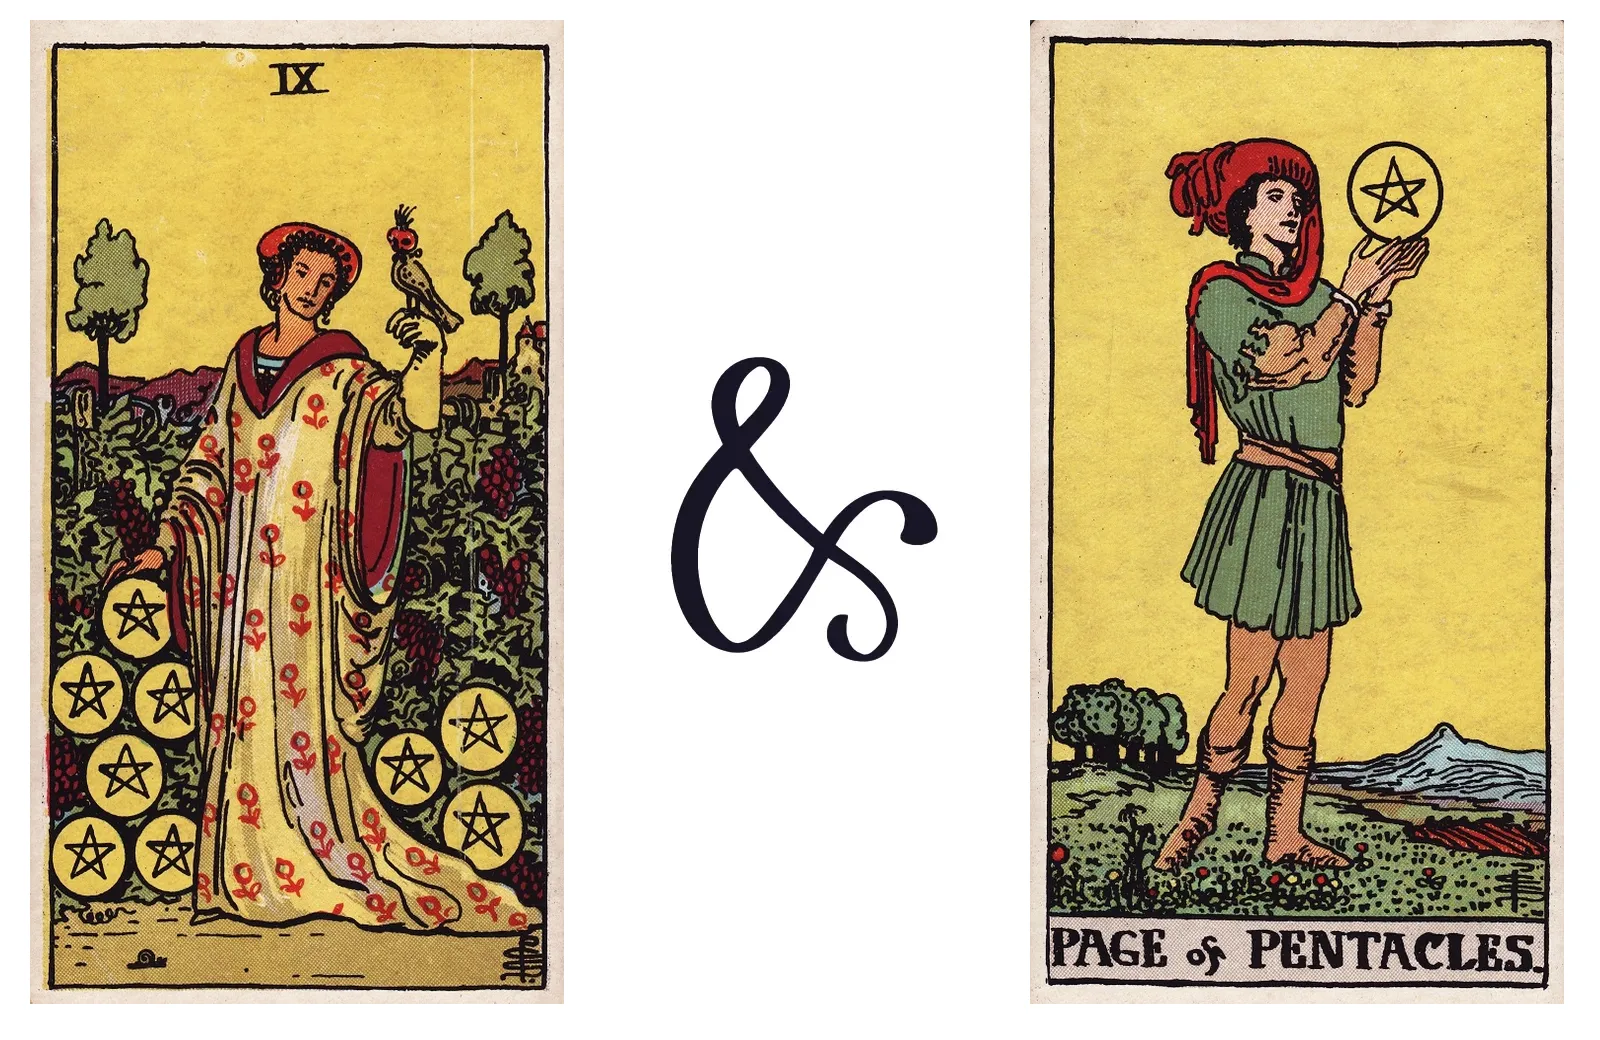 Nine of Pentacles and Page of Pentacles